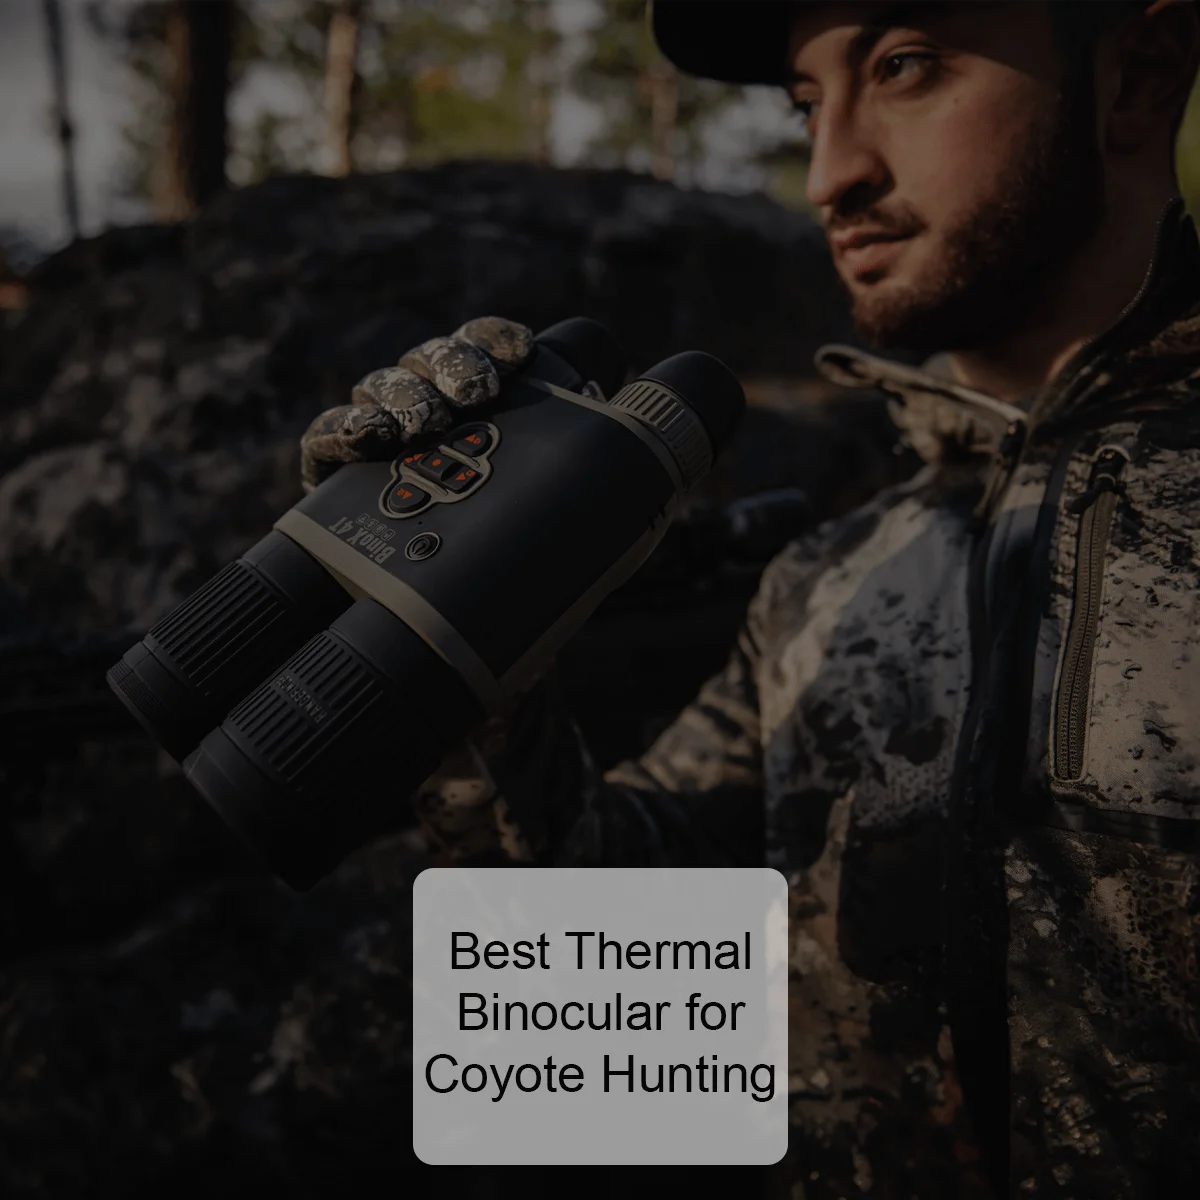 Best Thermal Binocular For Coyote Hunting